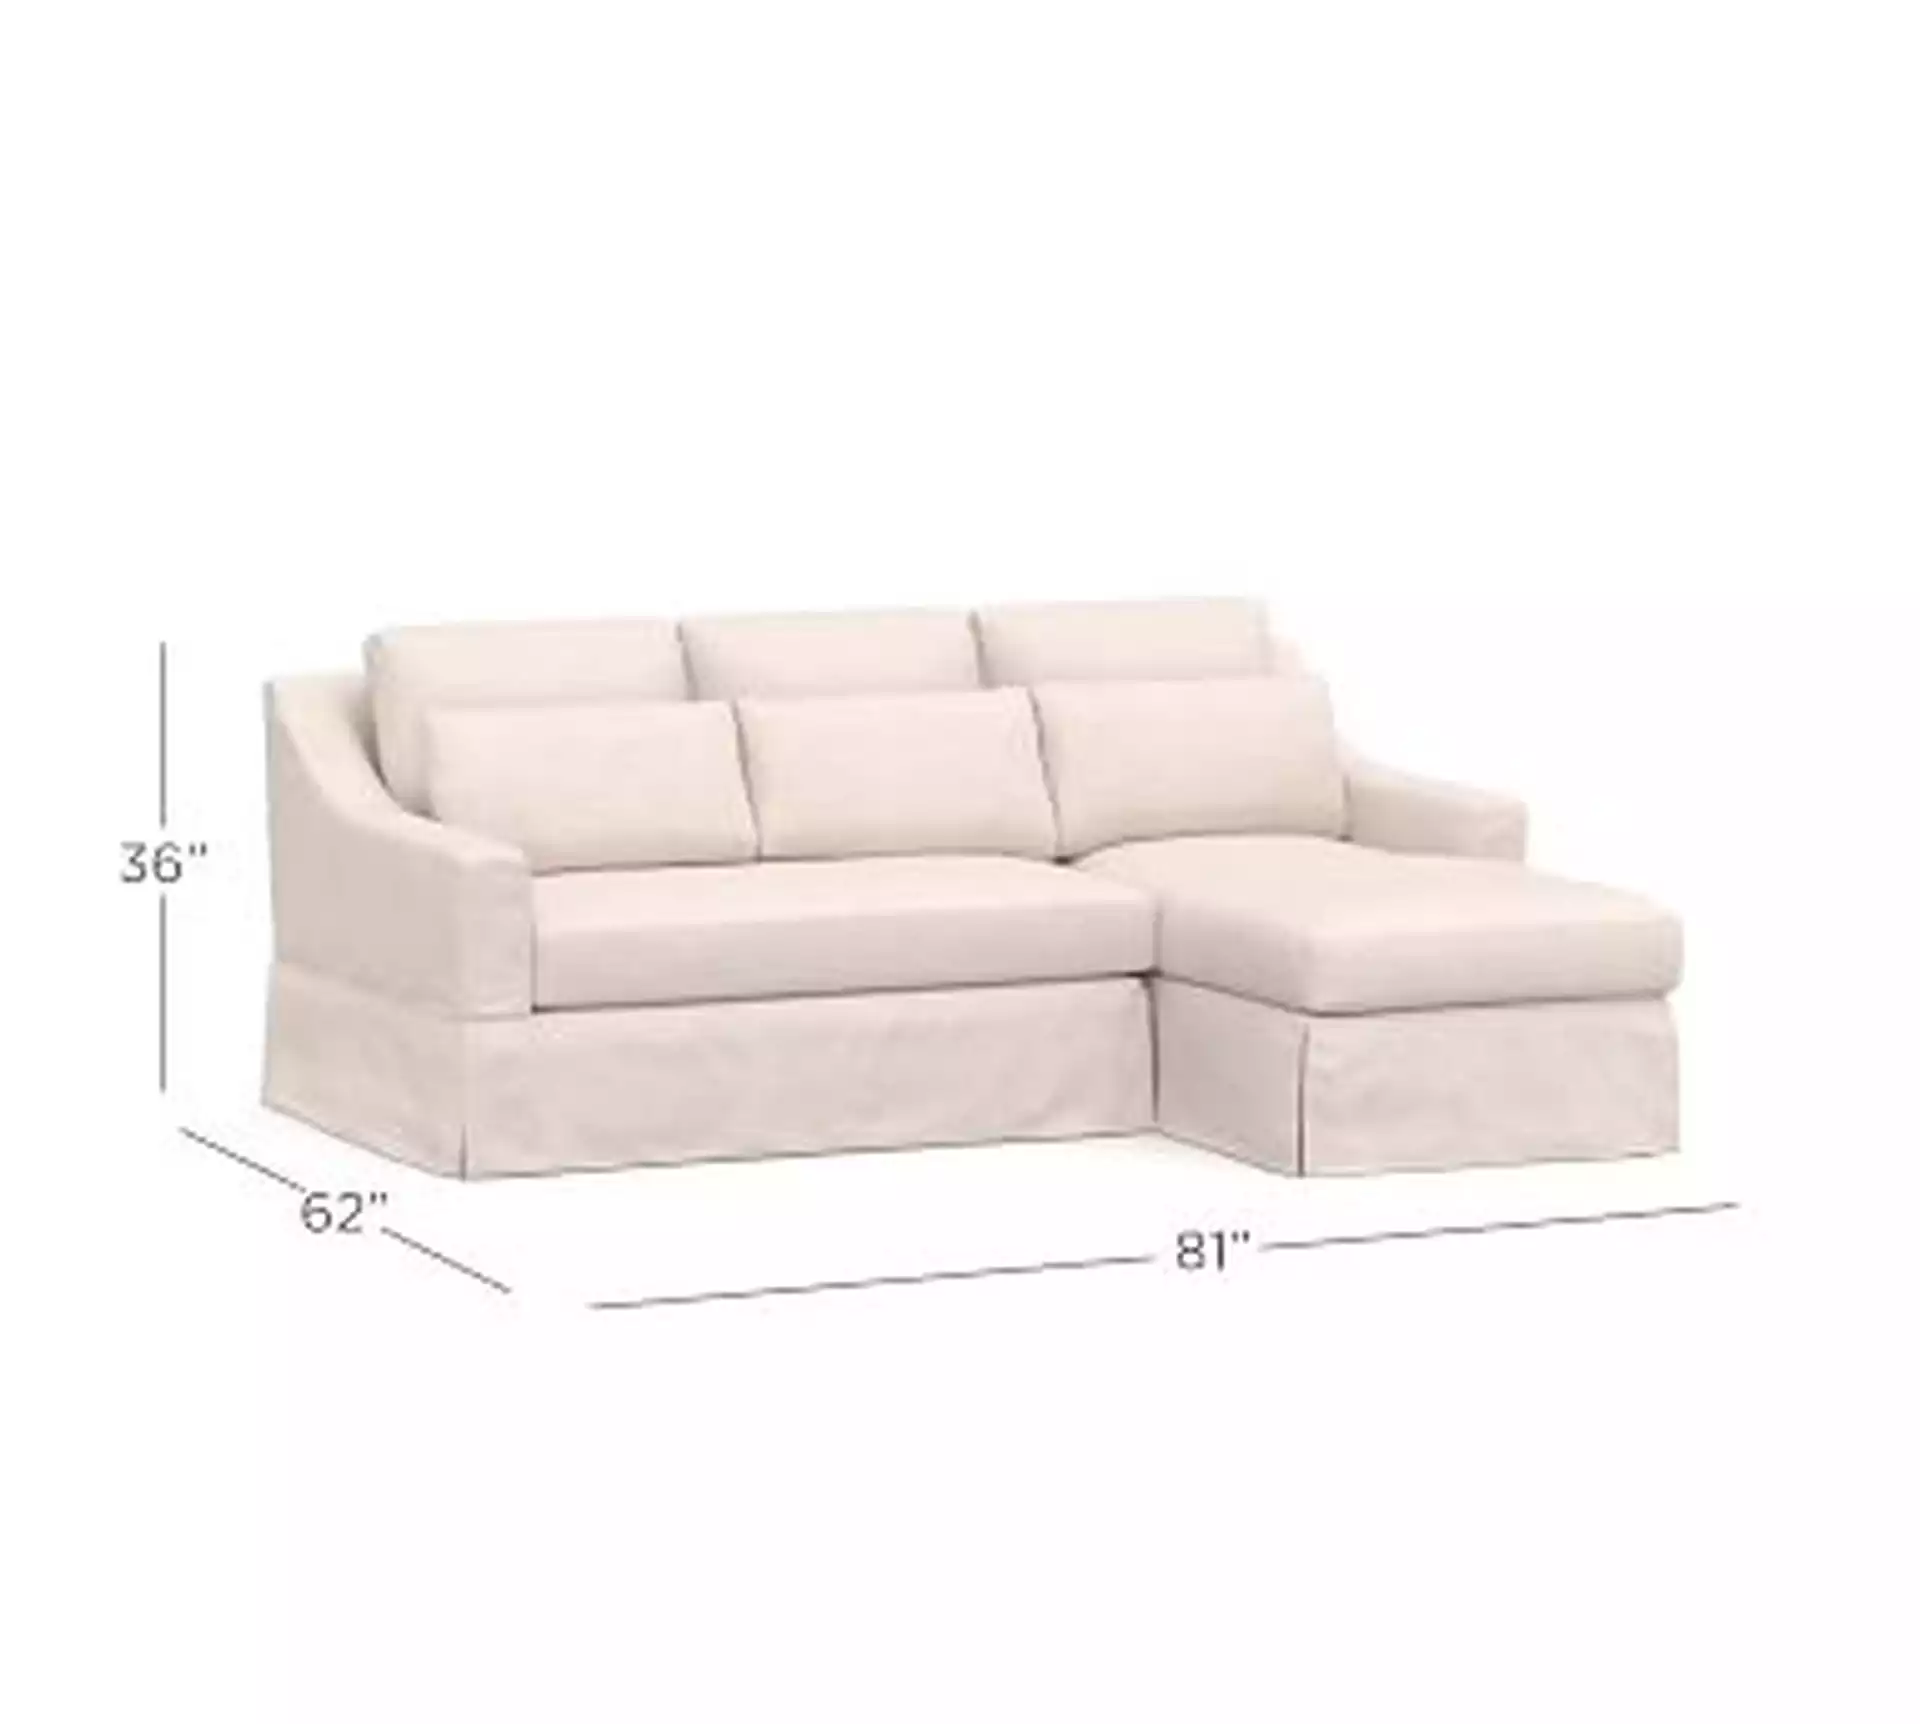 York Slope Arm Slipcovered Deep Seat Left Arm Sofa with Chaise Sectional, Down Blend Wrapped Cushions, Performance Slub Cotton White